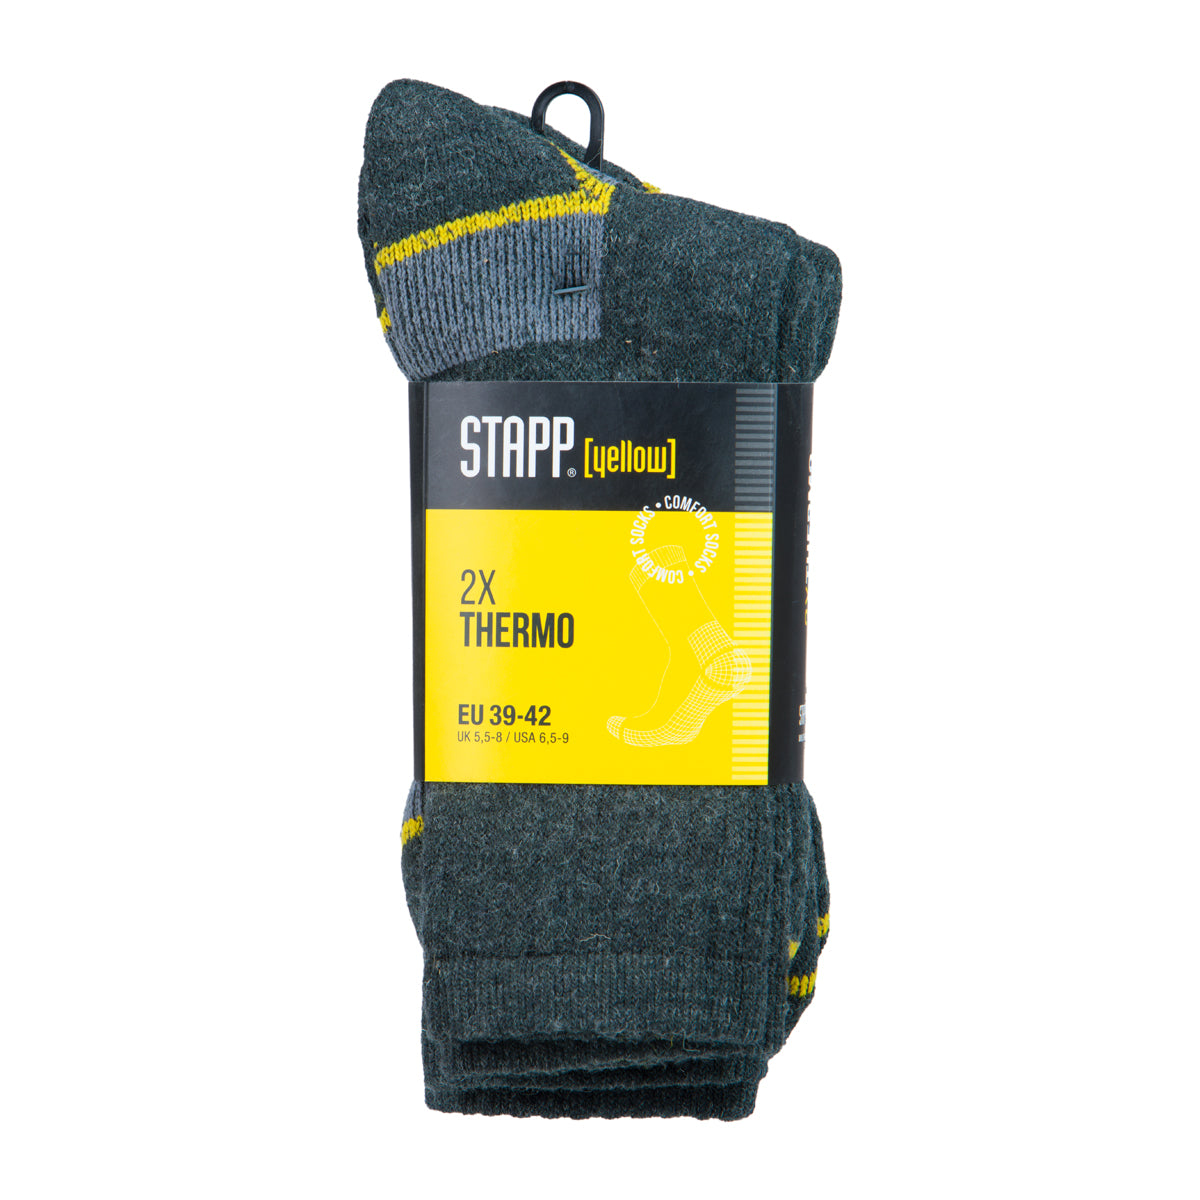 STAPP [yellow] 4420 THERMO | 2-PACK